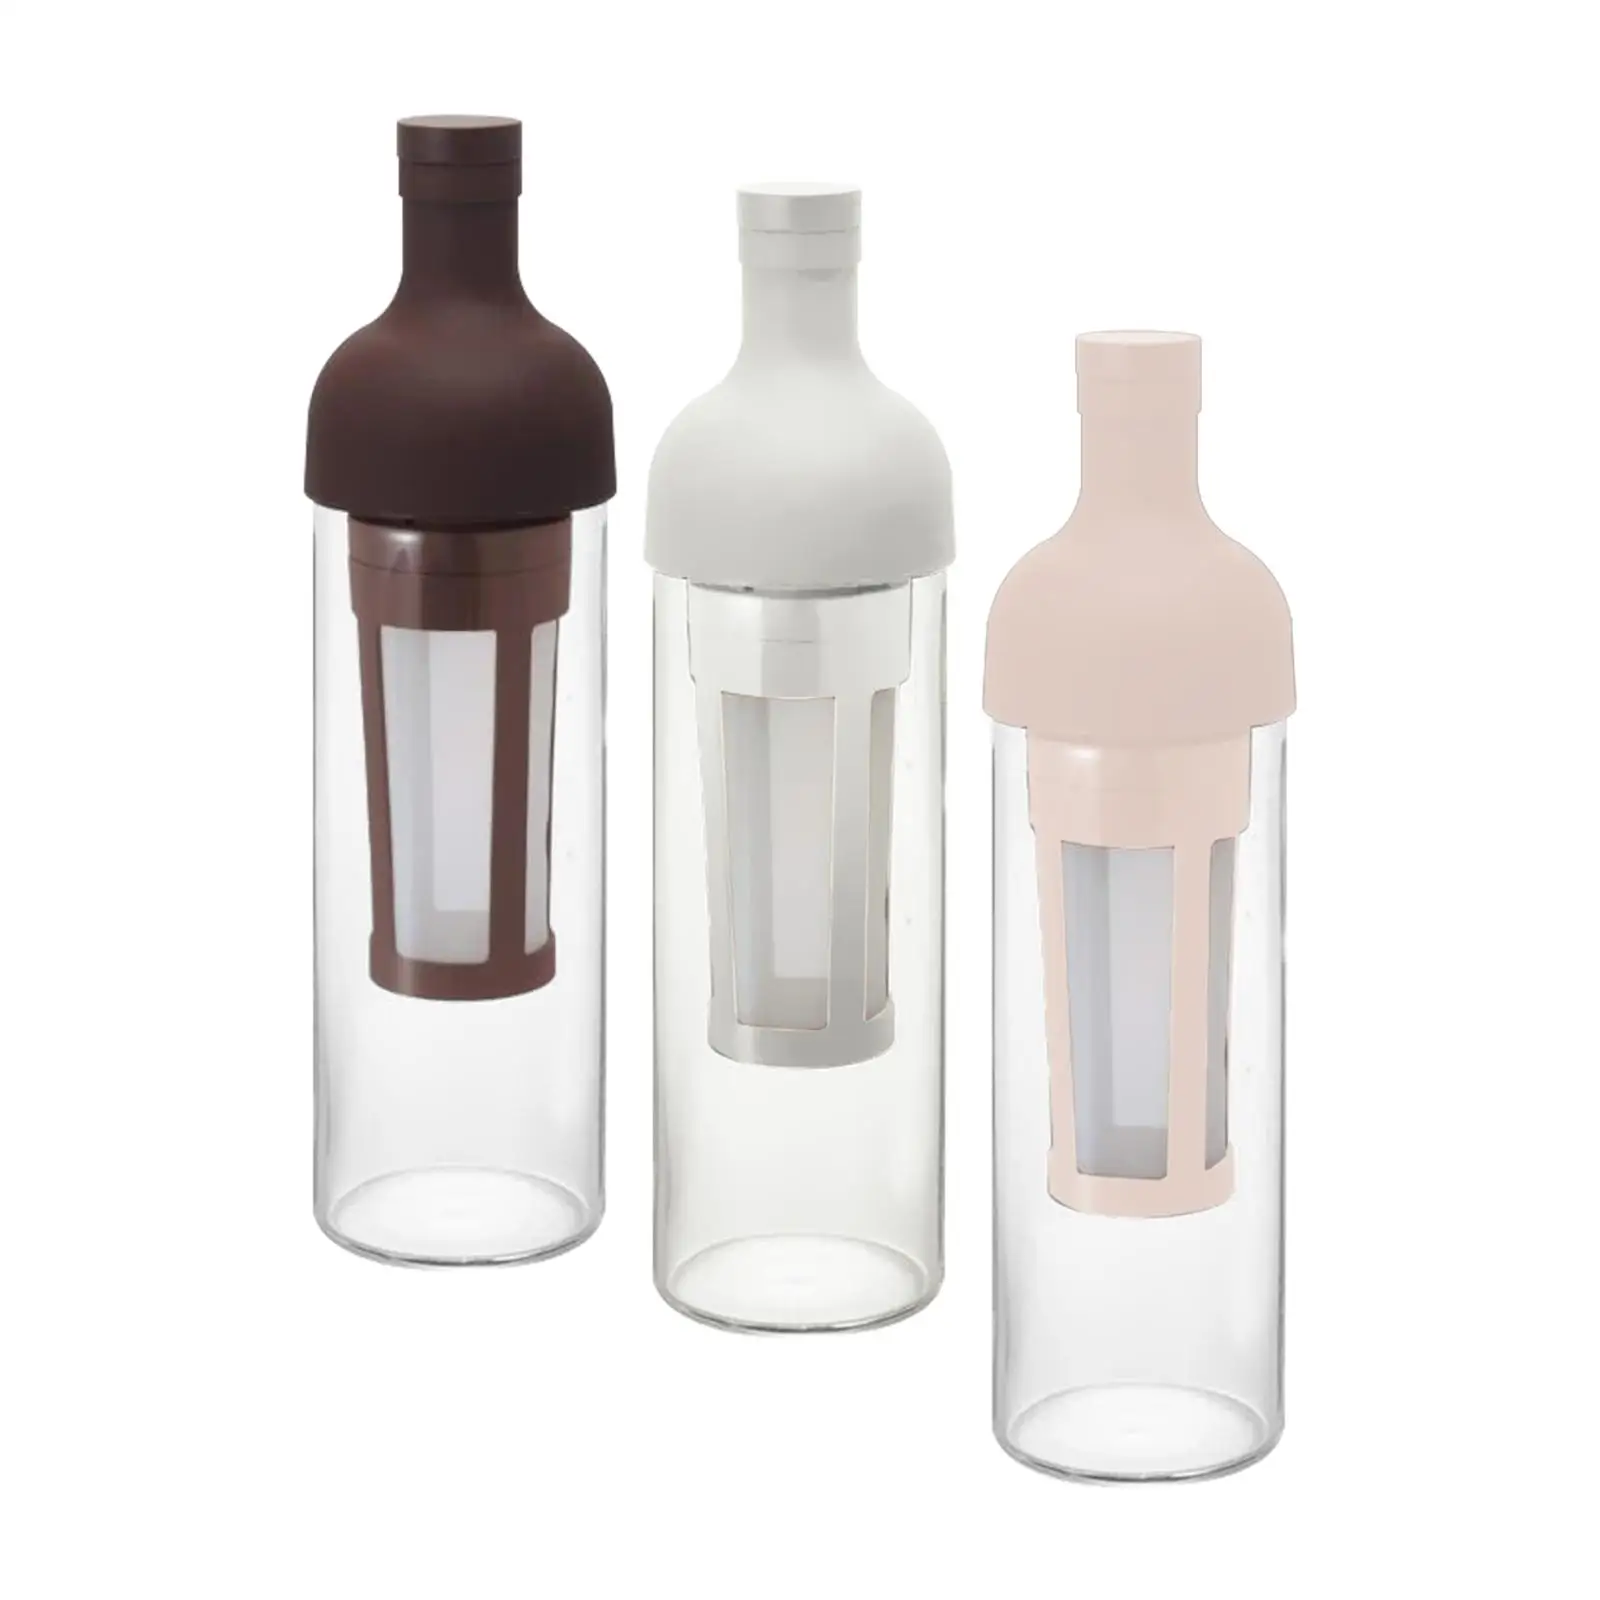 Glass Cold Tea Brewing Coffee Maker Ice Drip Coffee Pot Reusable Bottle Coffee Kettle Iced Tea Maker Kitchen Accessories